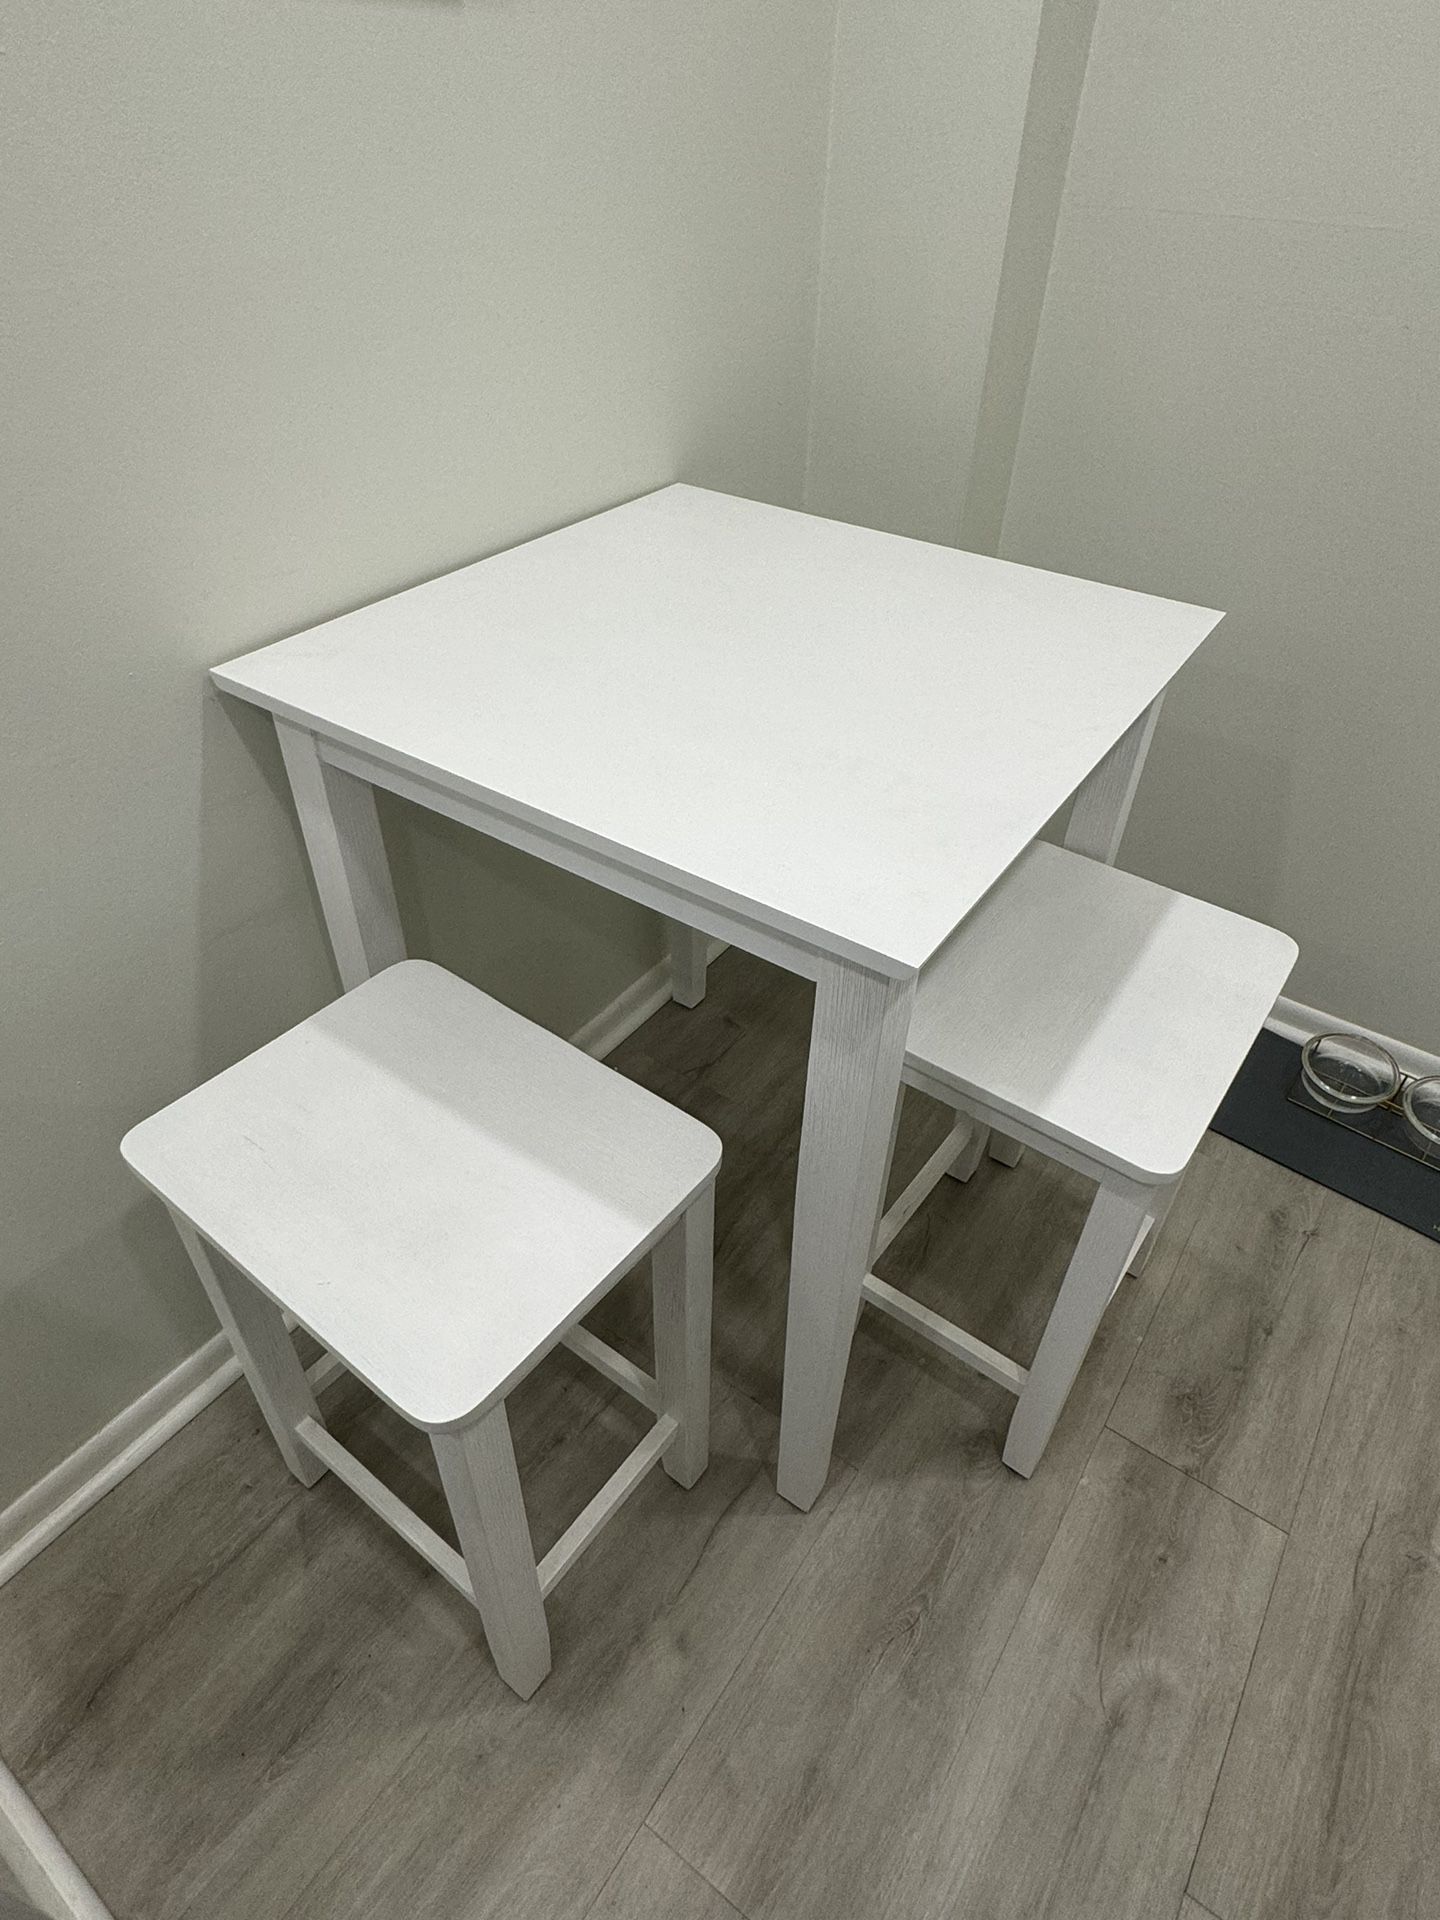 Counter Height Top Breakfast Table Plus 2 Chairs